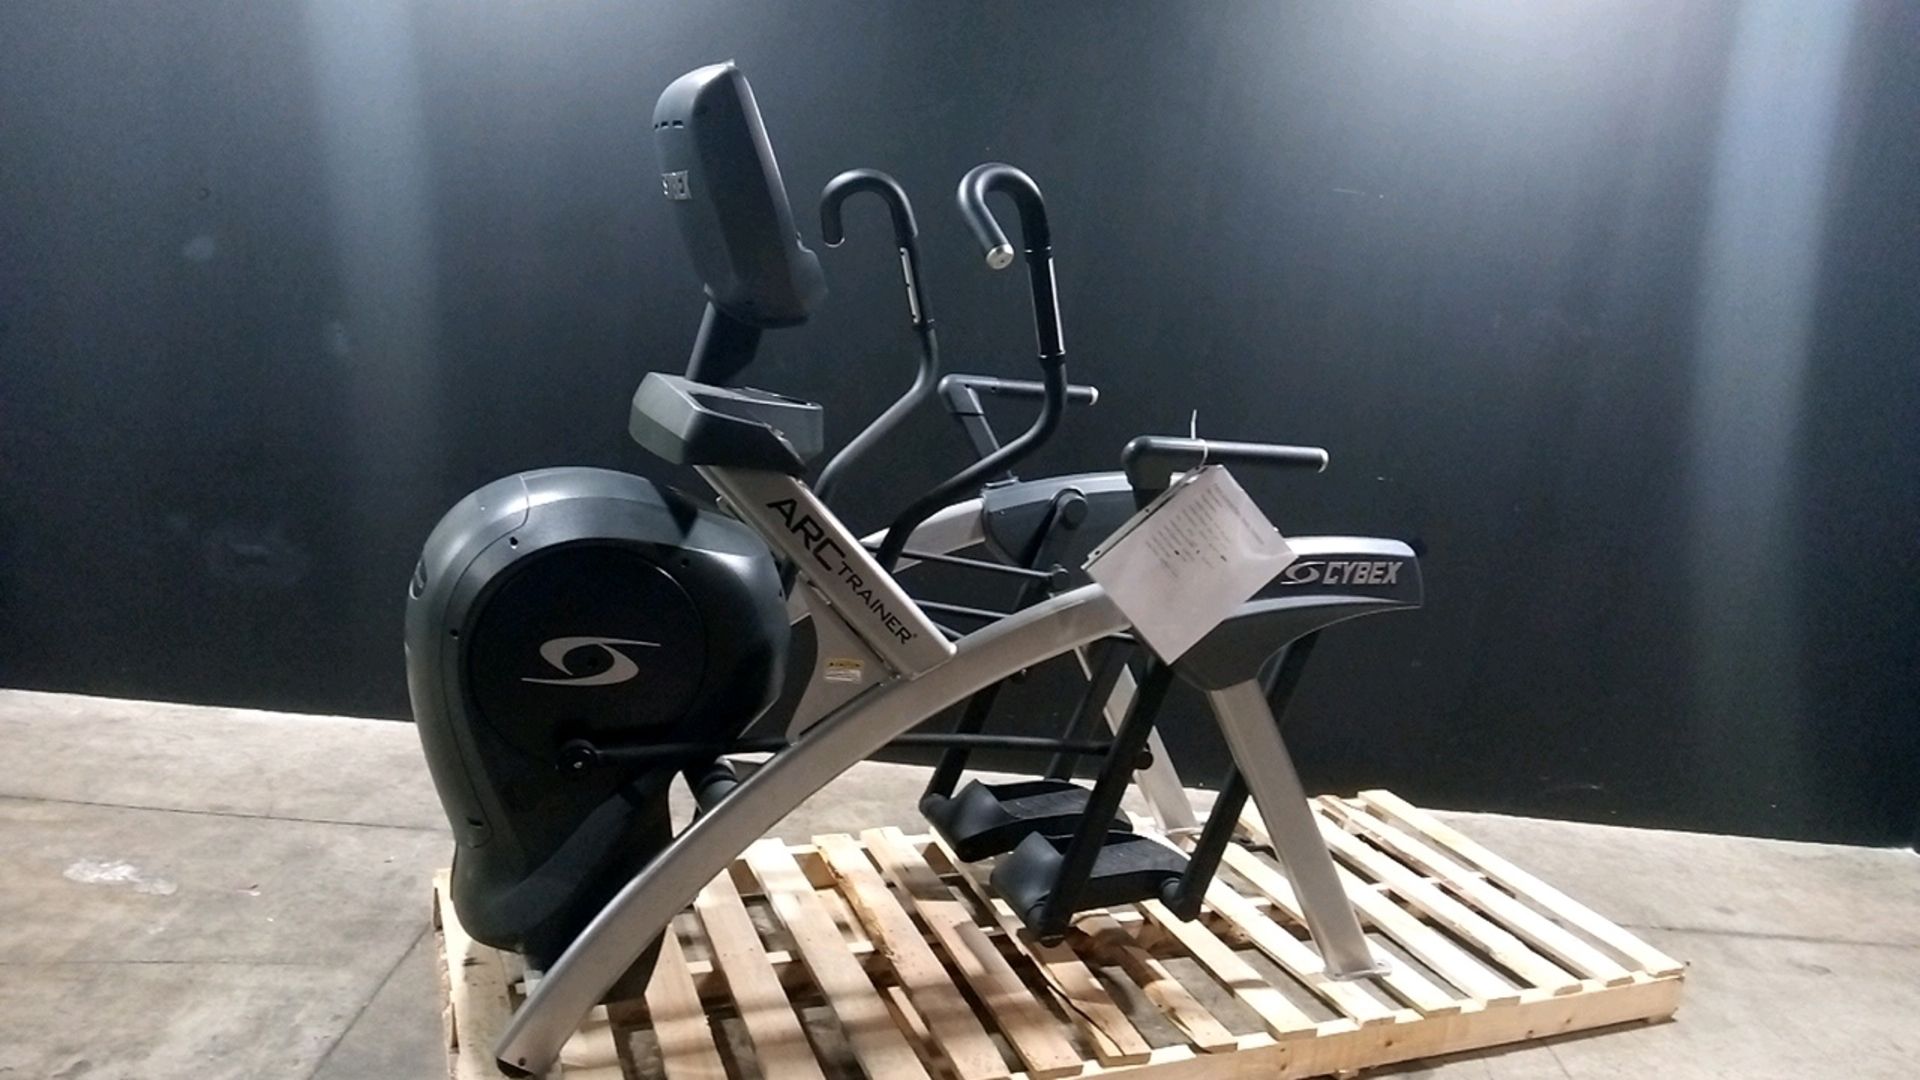 CYBEX 771AT ARC TRAINER